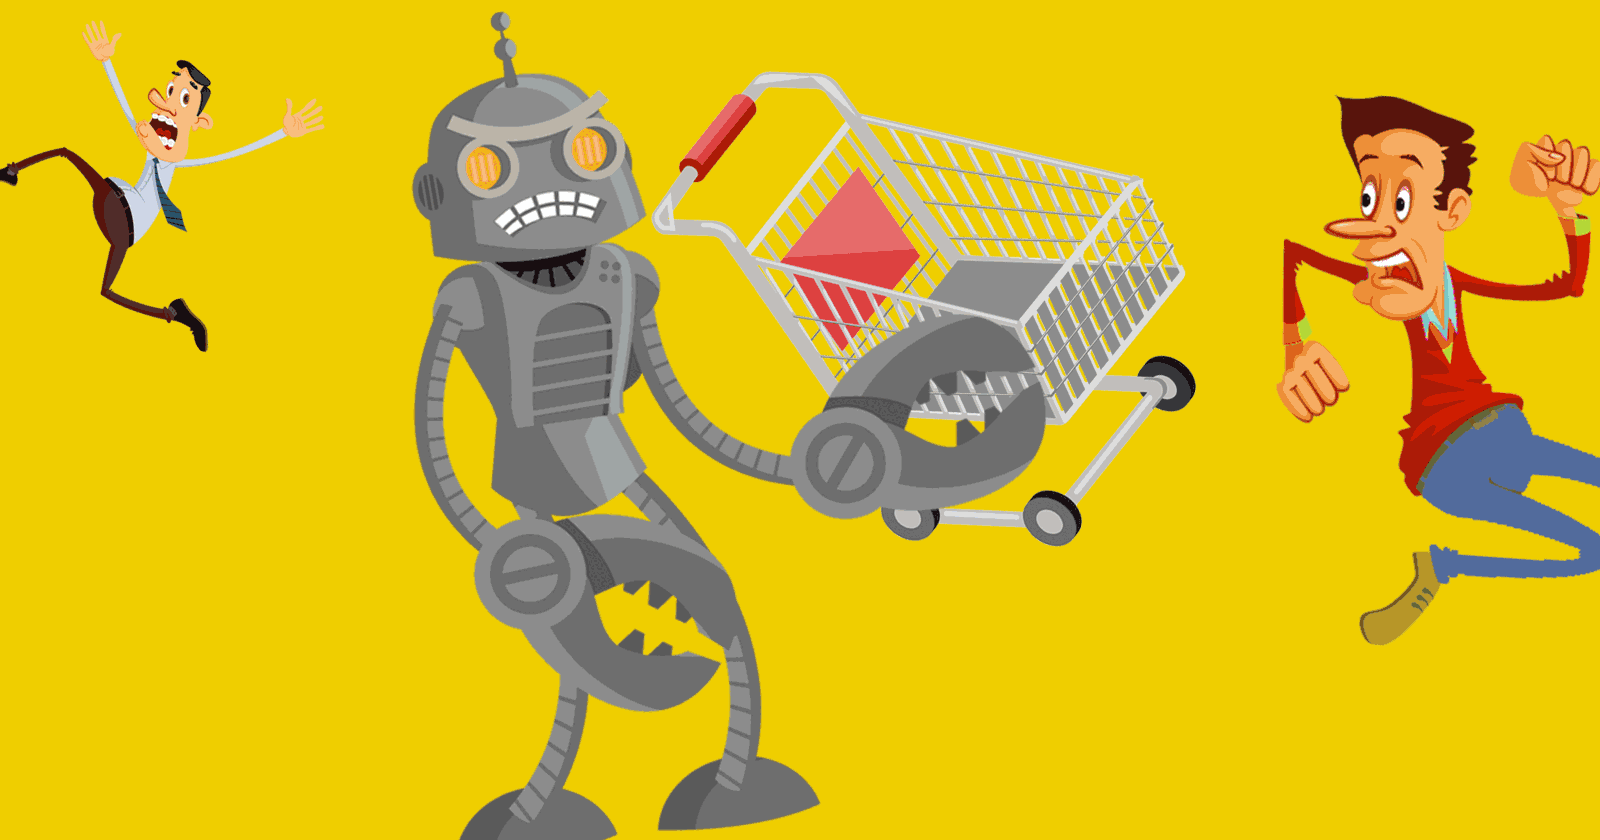 Googlebot adding products to shopping carts